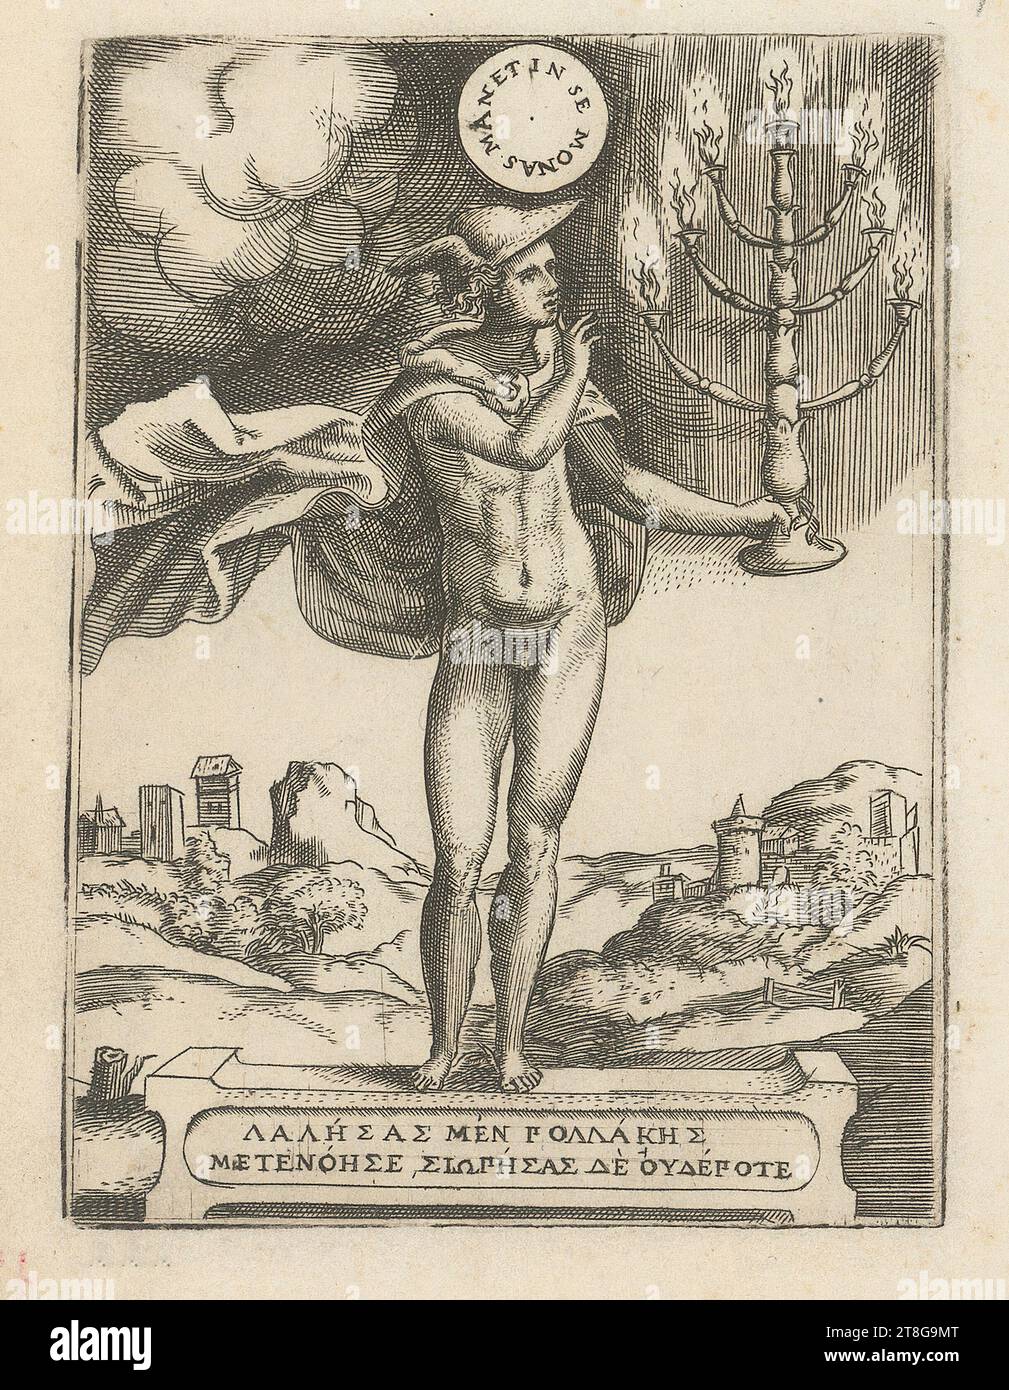 Giulio Bonasone (1510 c. - c. 1576), artist, Allegory of Patience, Giulio Bonasone (1510 c. - c. 1576), artist, Mercury with a seven-branched candlestick, medium: c. 1555, copperplate engraving on vergé paper, sheet size: 13.6 x 10.9 cm, platemark: 11.3 x 8.4 cm, inscribed at top center on disc 'MANET IN SE MONAS'; inscribed at bottom center on cartouche '?A?HSAS Stock Photo